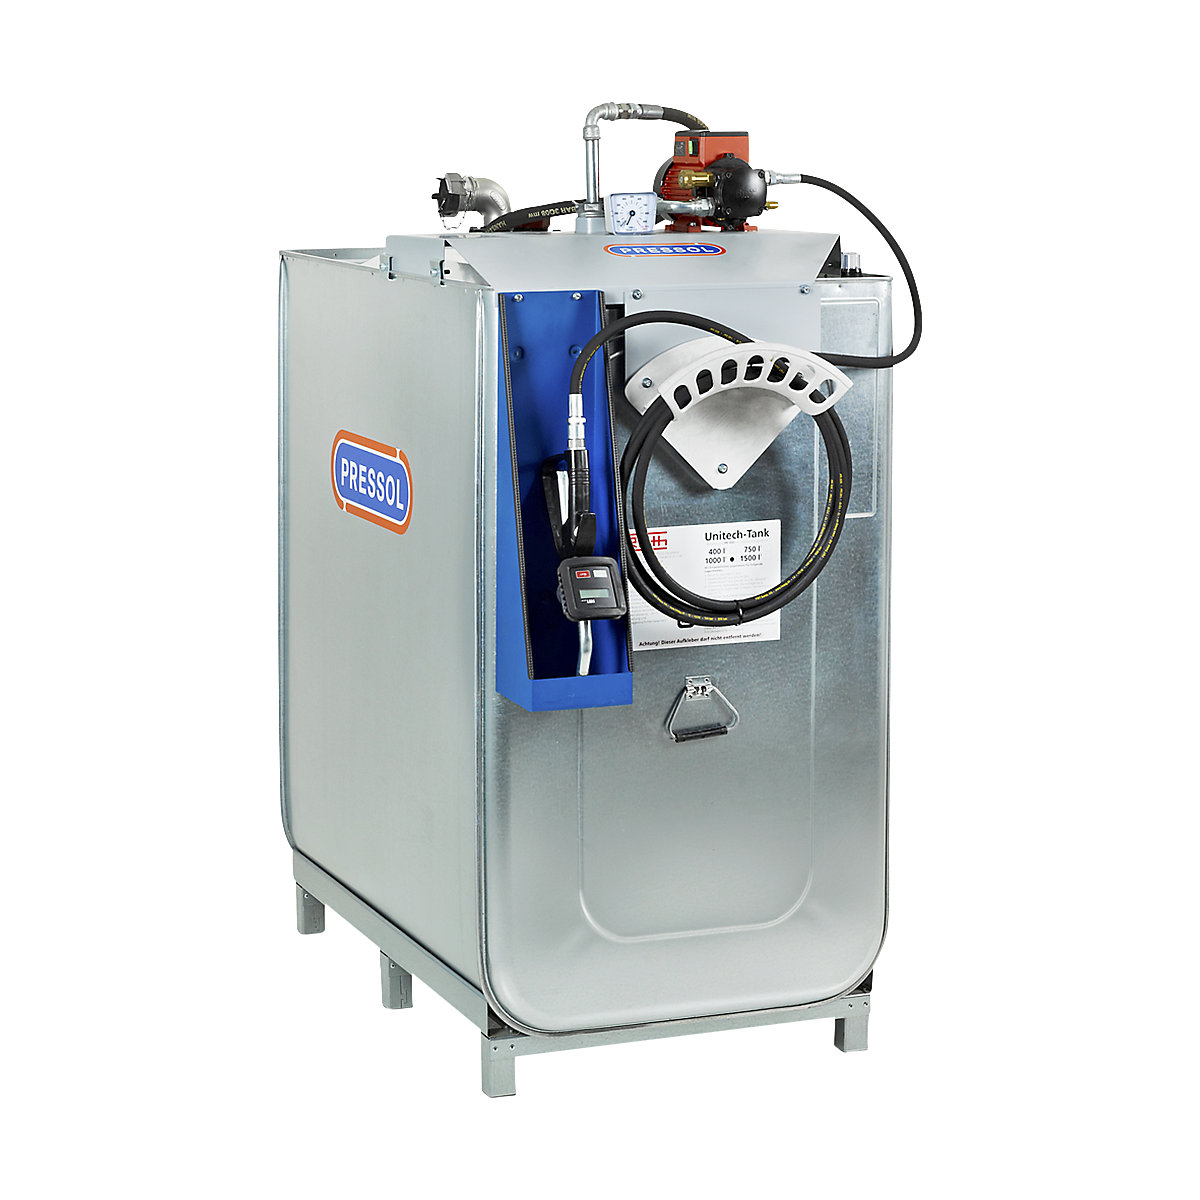 PRESSOL – Compact oil tank system for fresh oil / low flammability oils